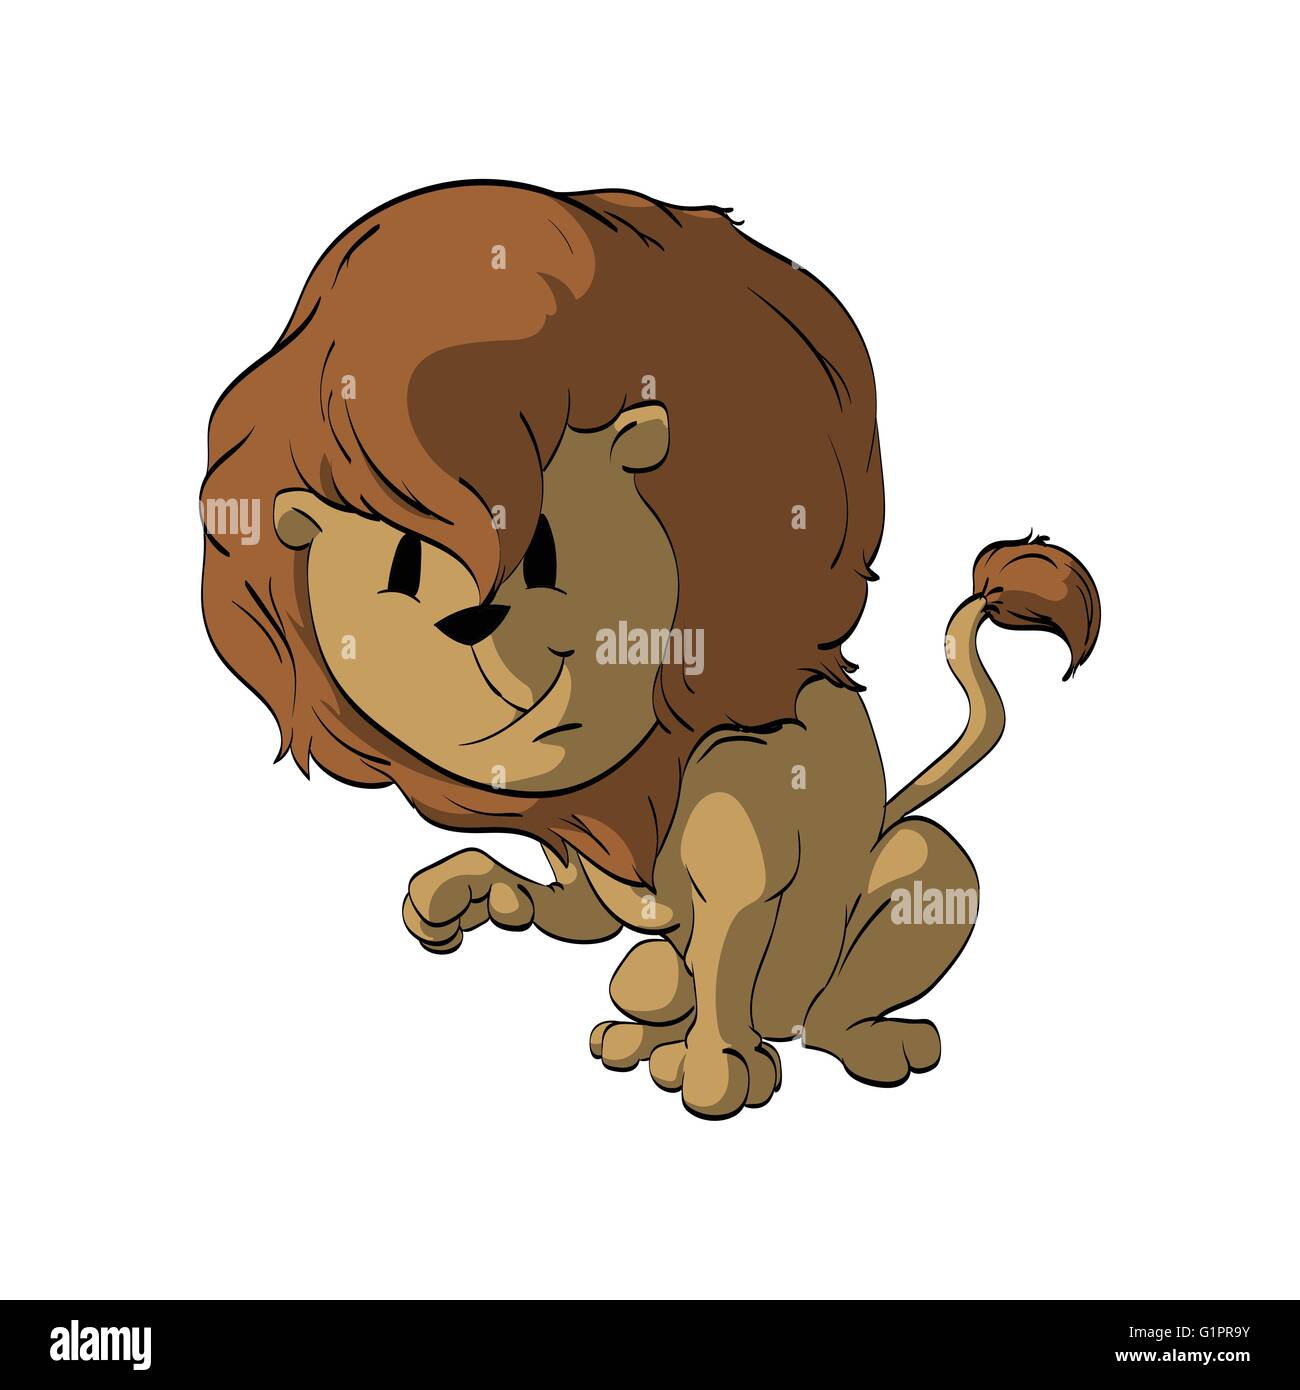 Colorful vector illustration of a cartoon lion. Stock Vector